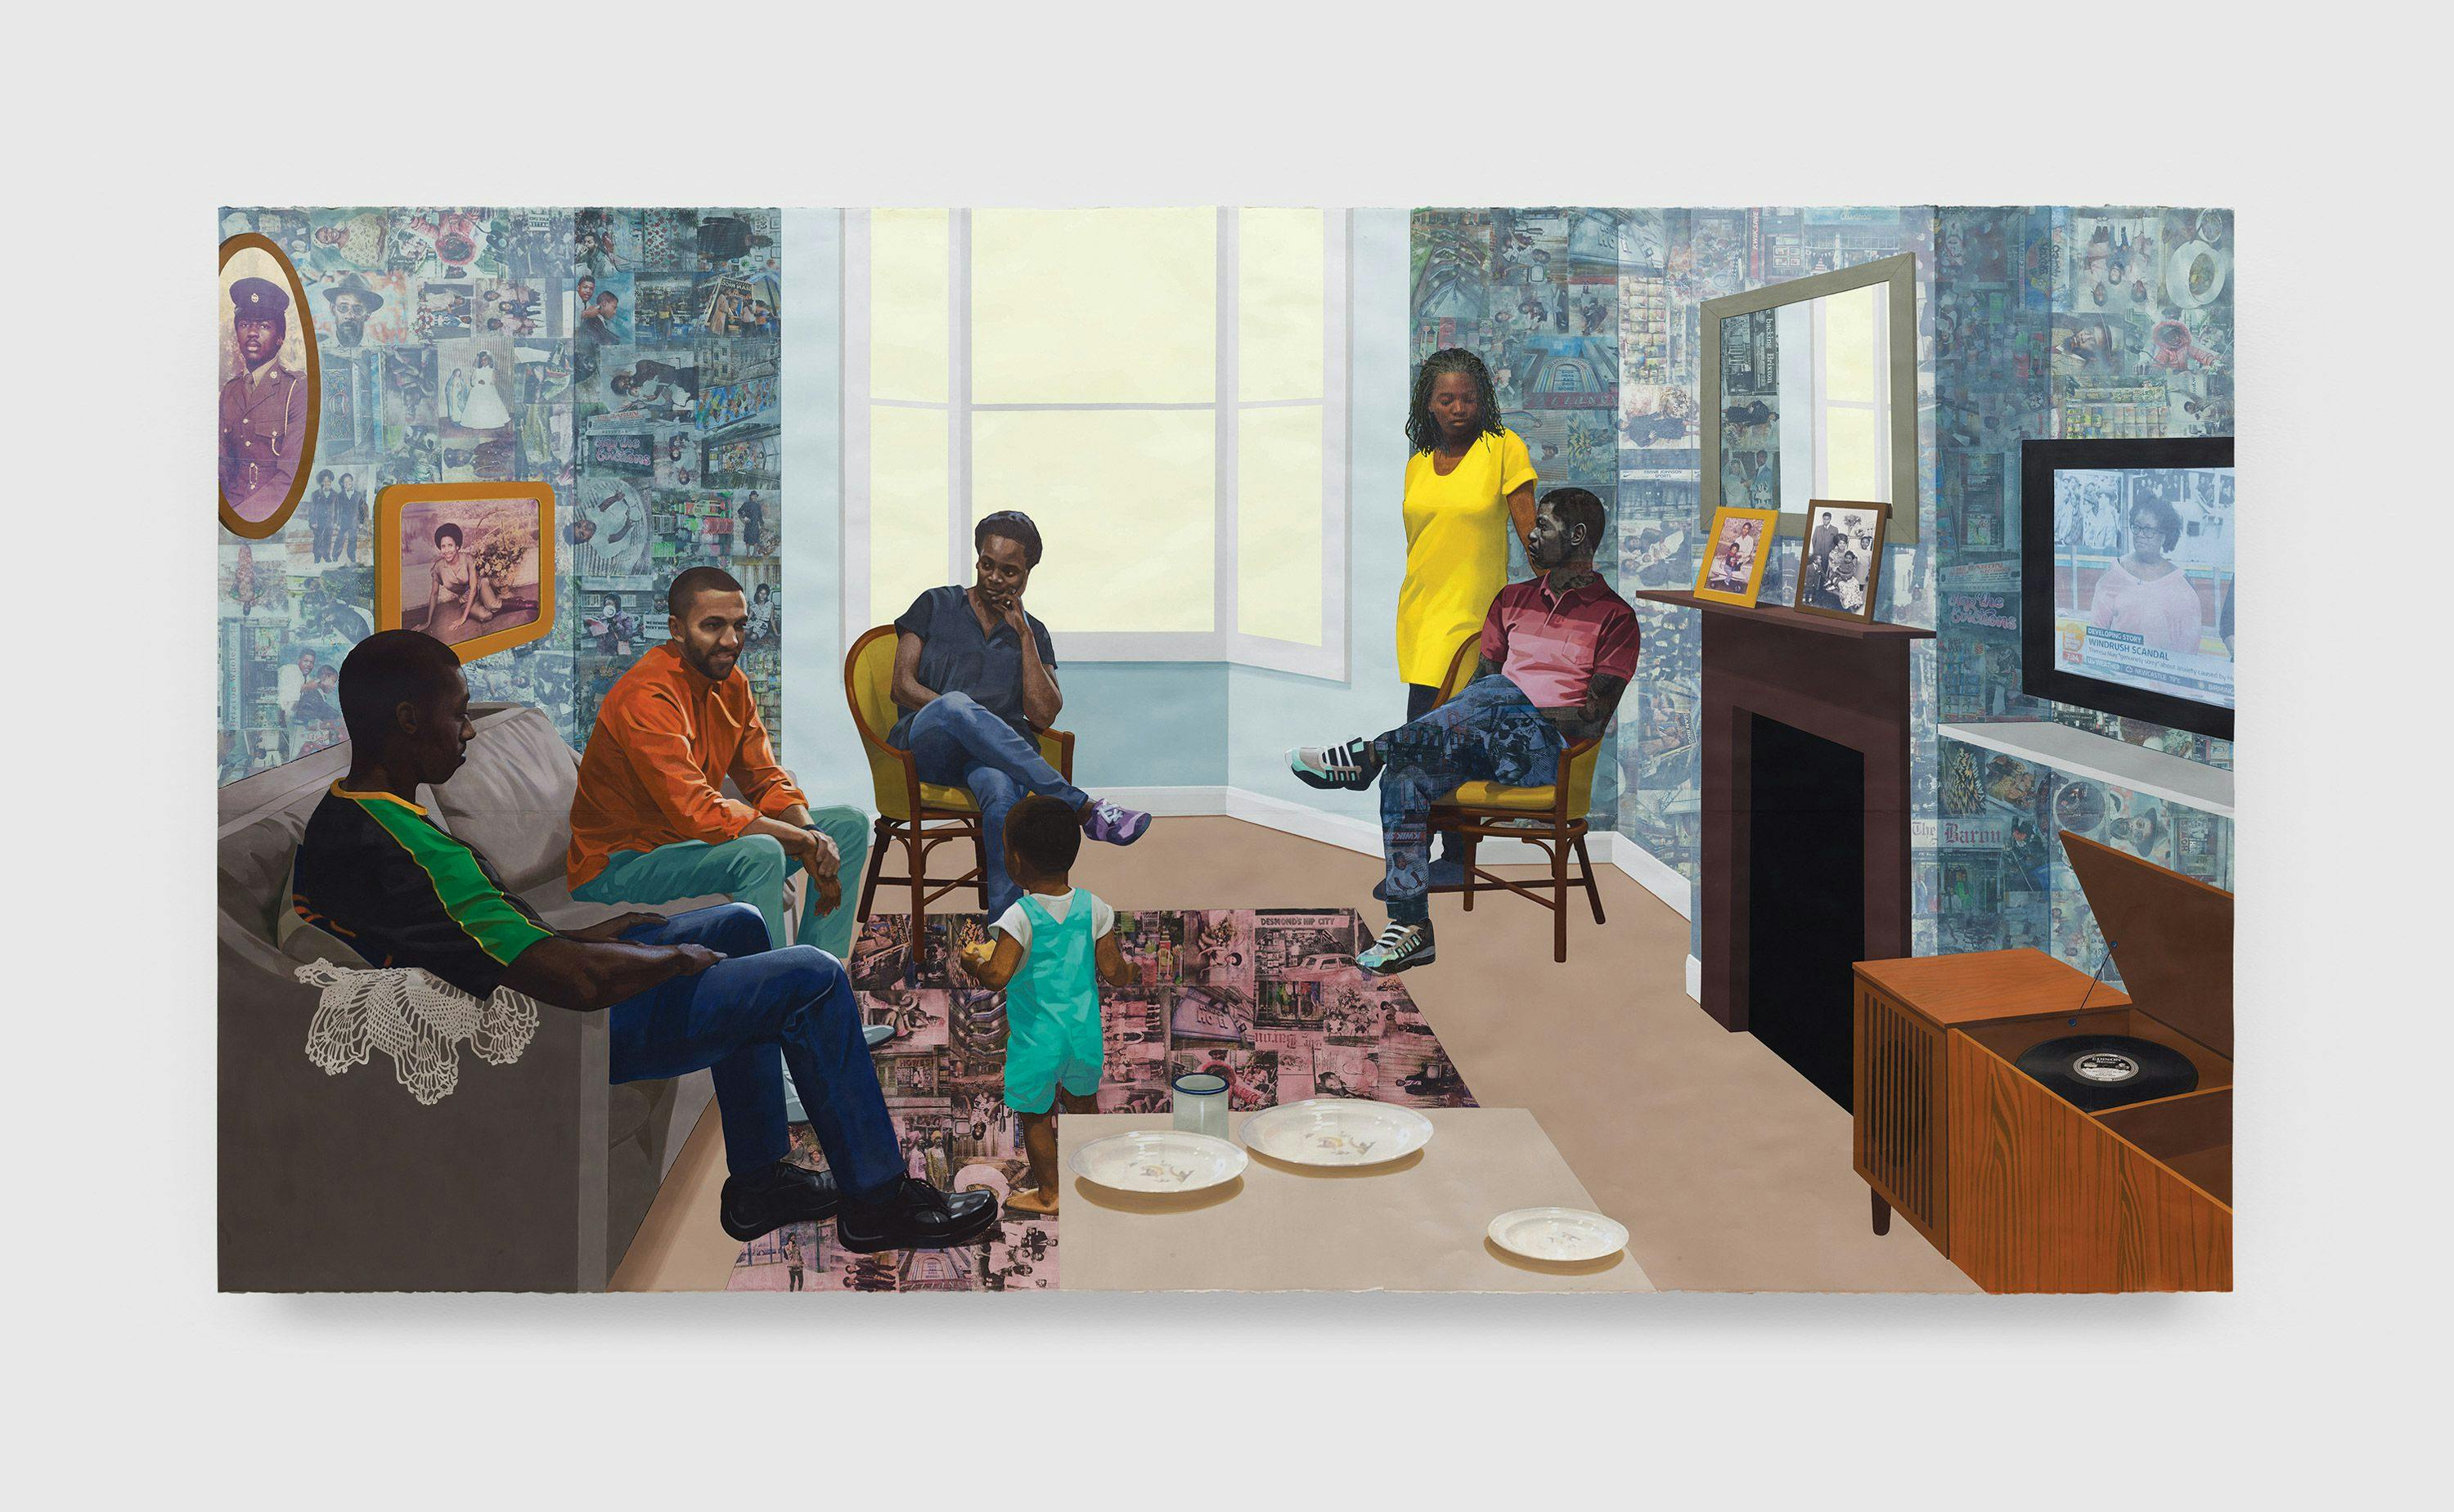 A work on paper by Njideka Akunyili Crosby, titled Remain, Thriving, dated 2018.